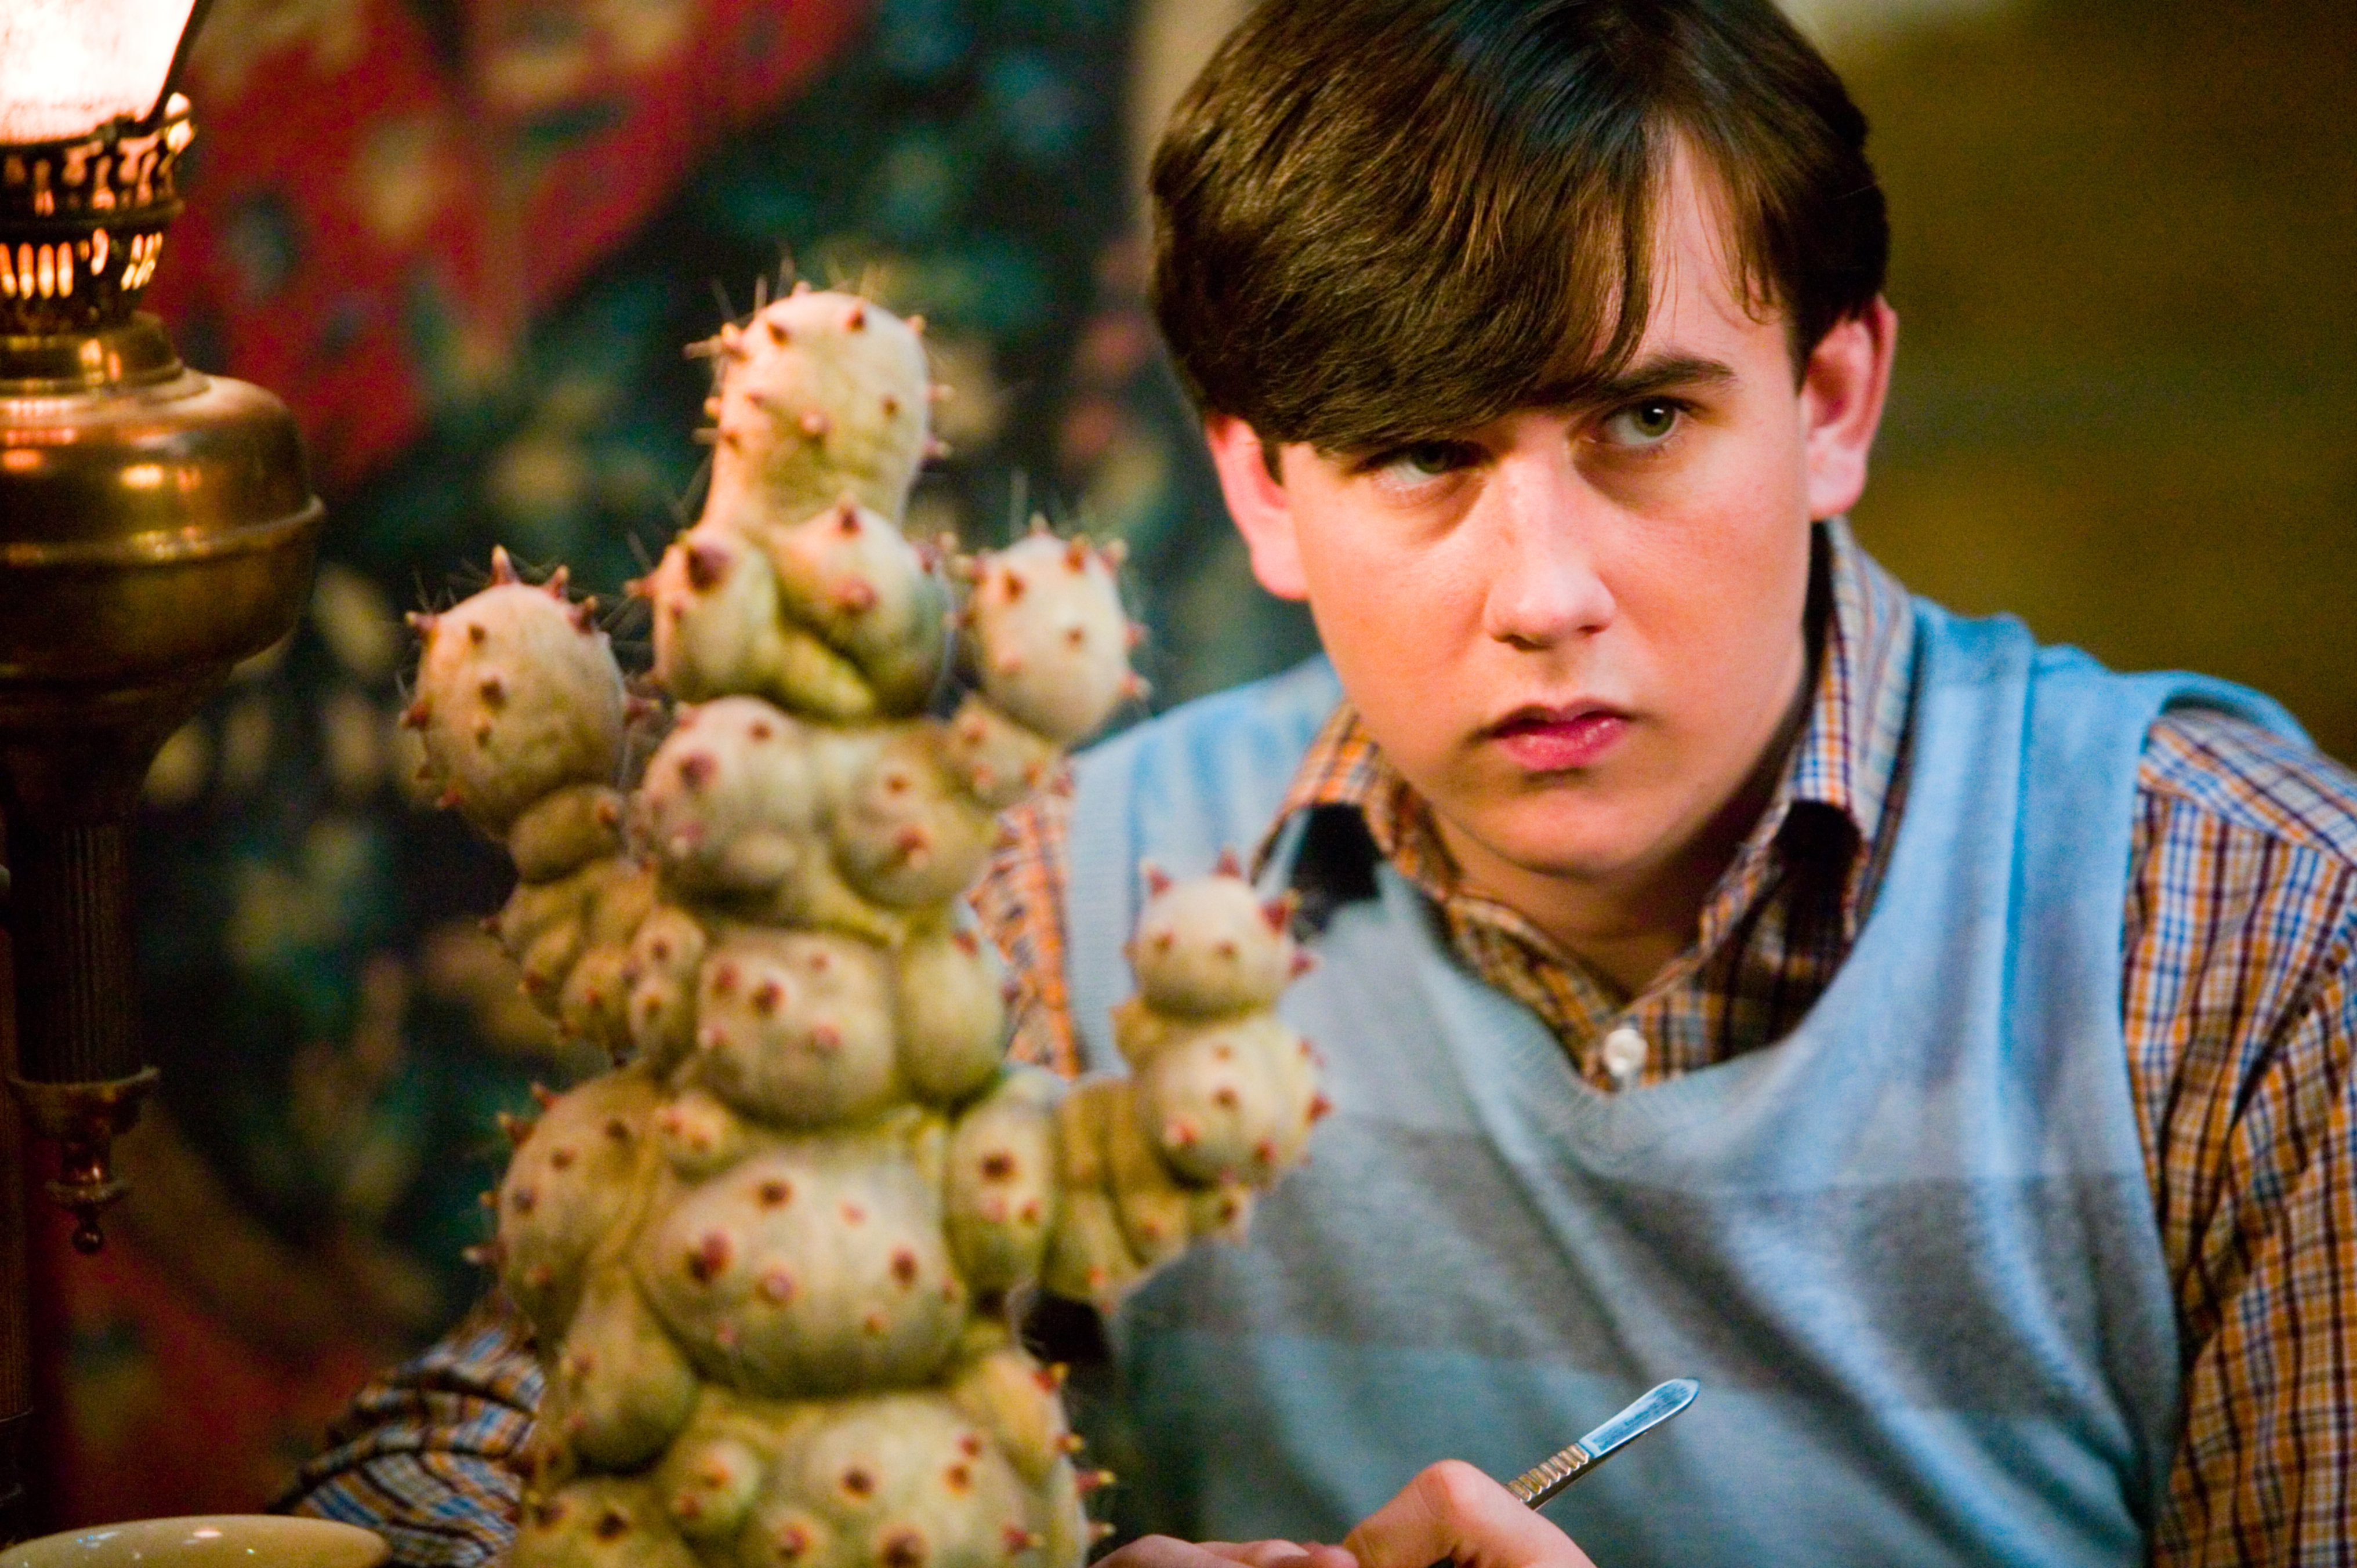 Neville with his Mimbulus Mimbletonia in a Herbology class